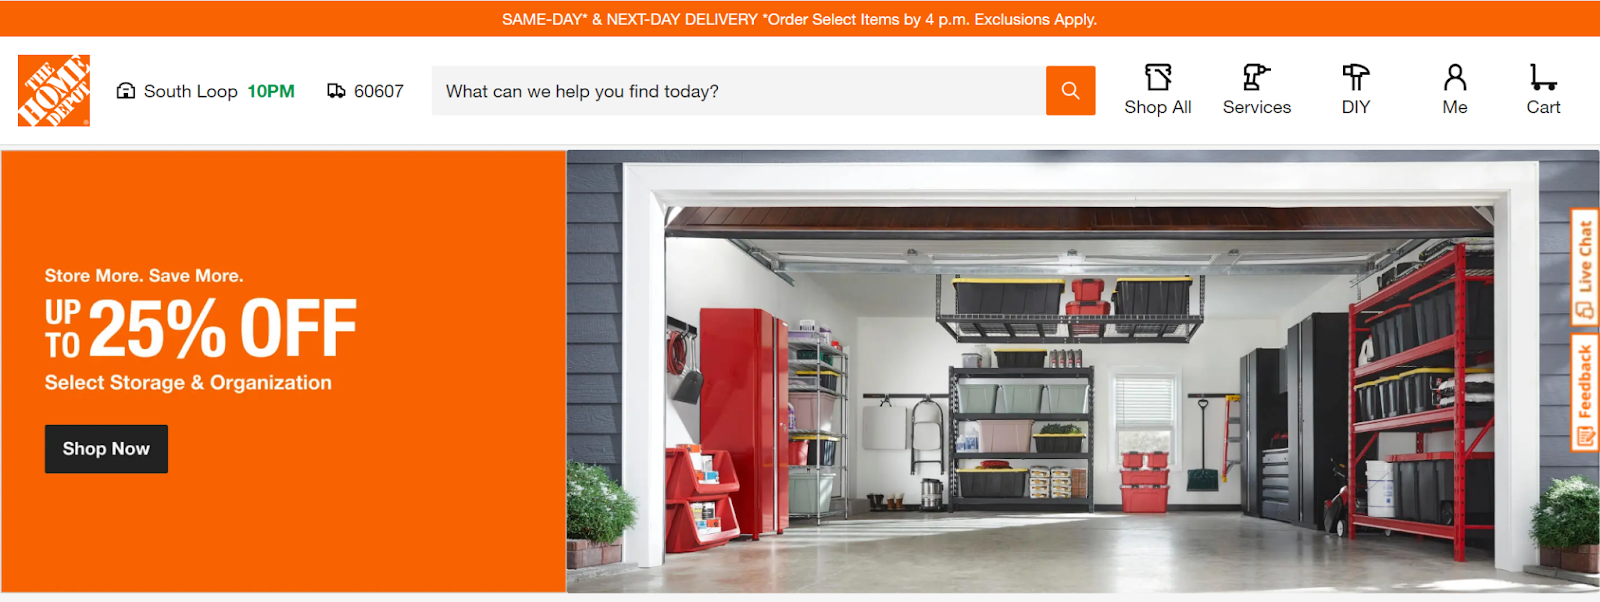 Home Depot home page